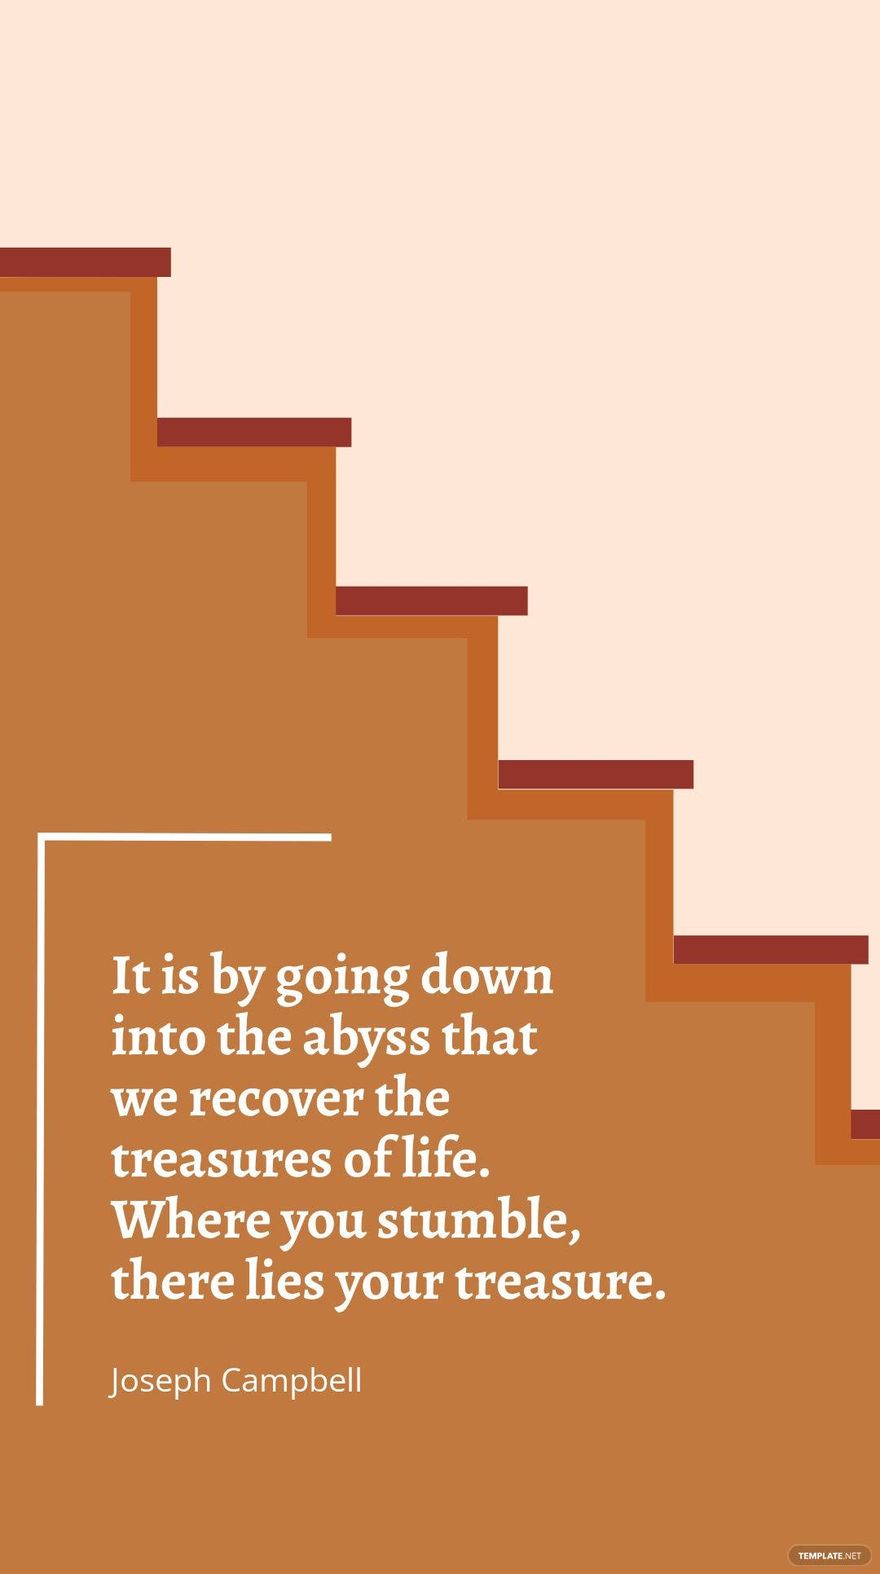 Joseph Campbell - It is by going down into the abyss that we recover the treasures of life. Where you stumble, there lies your treasure.